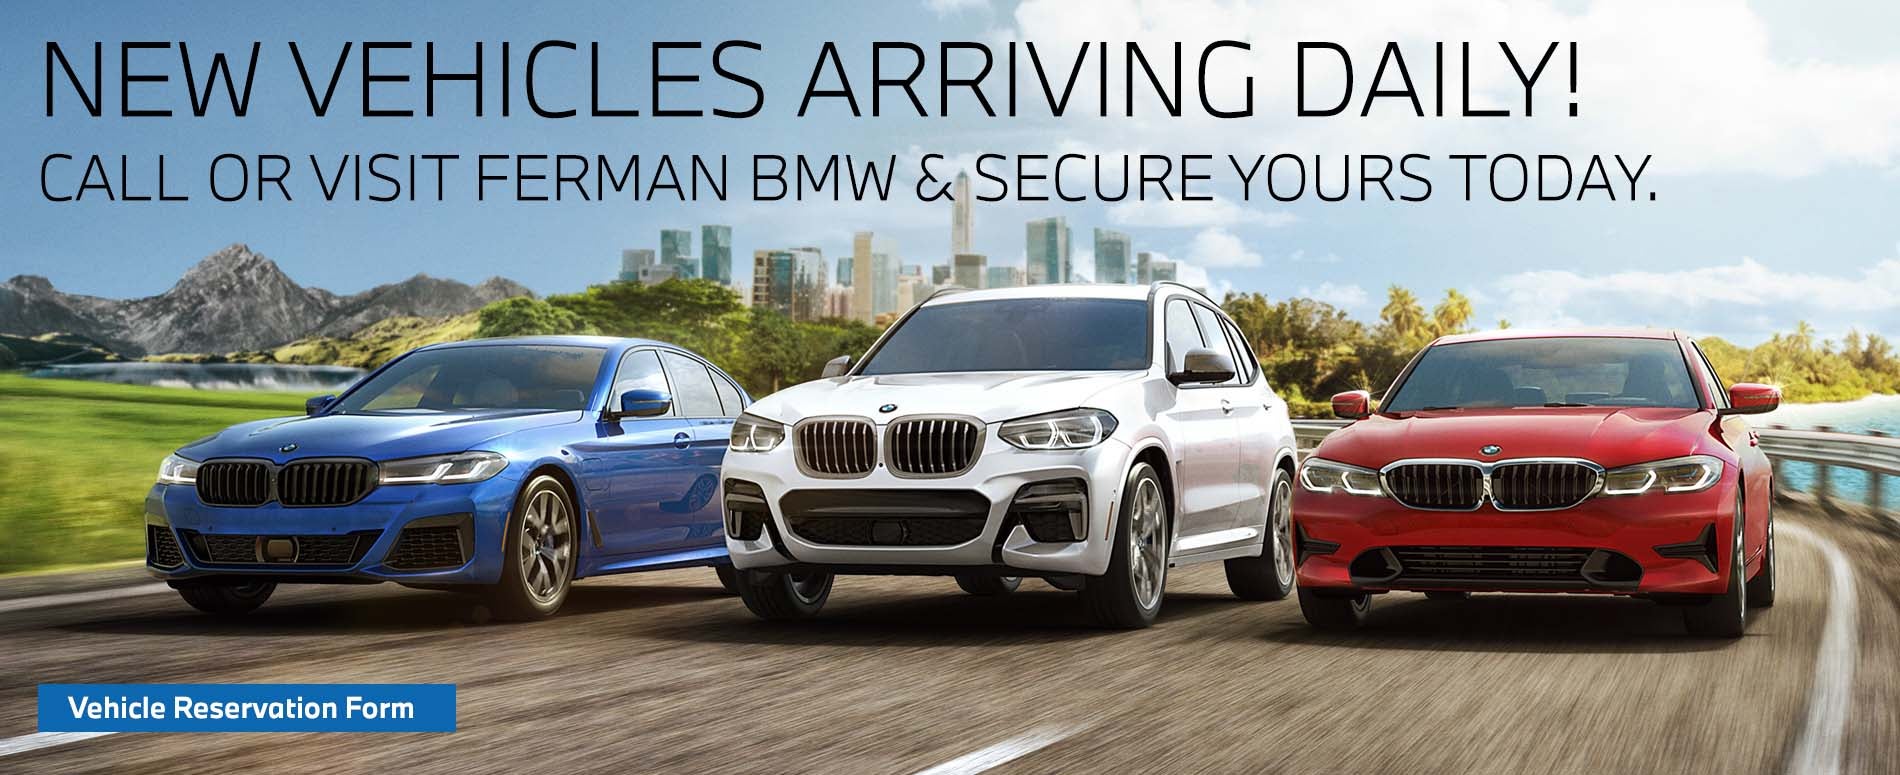 New Vehicles Arriving Daily! | Ferman BMW